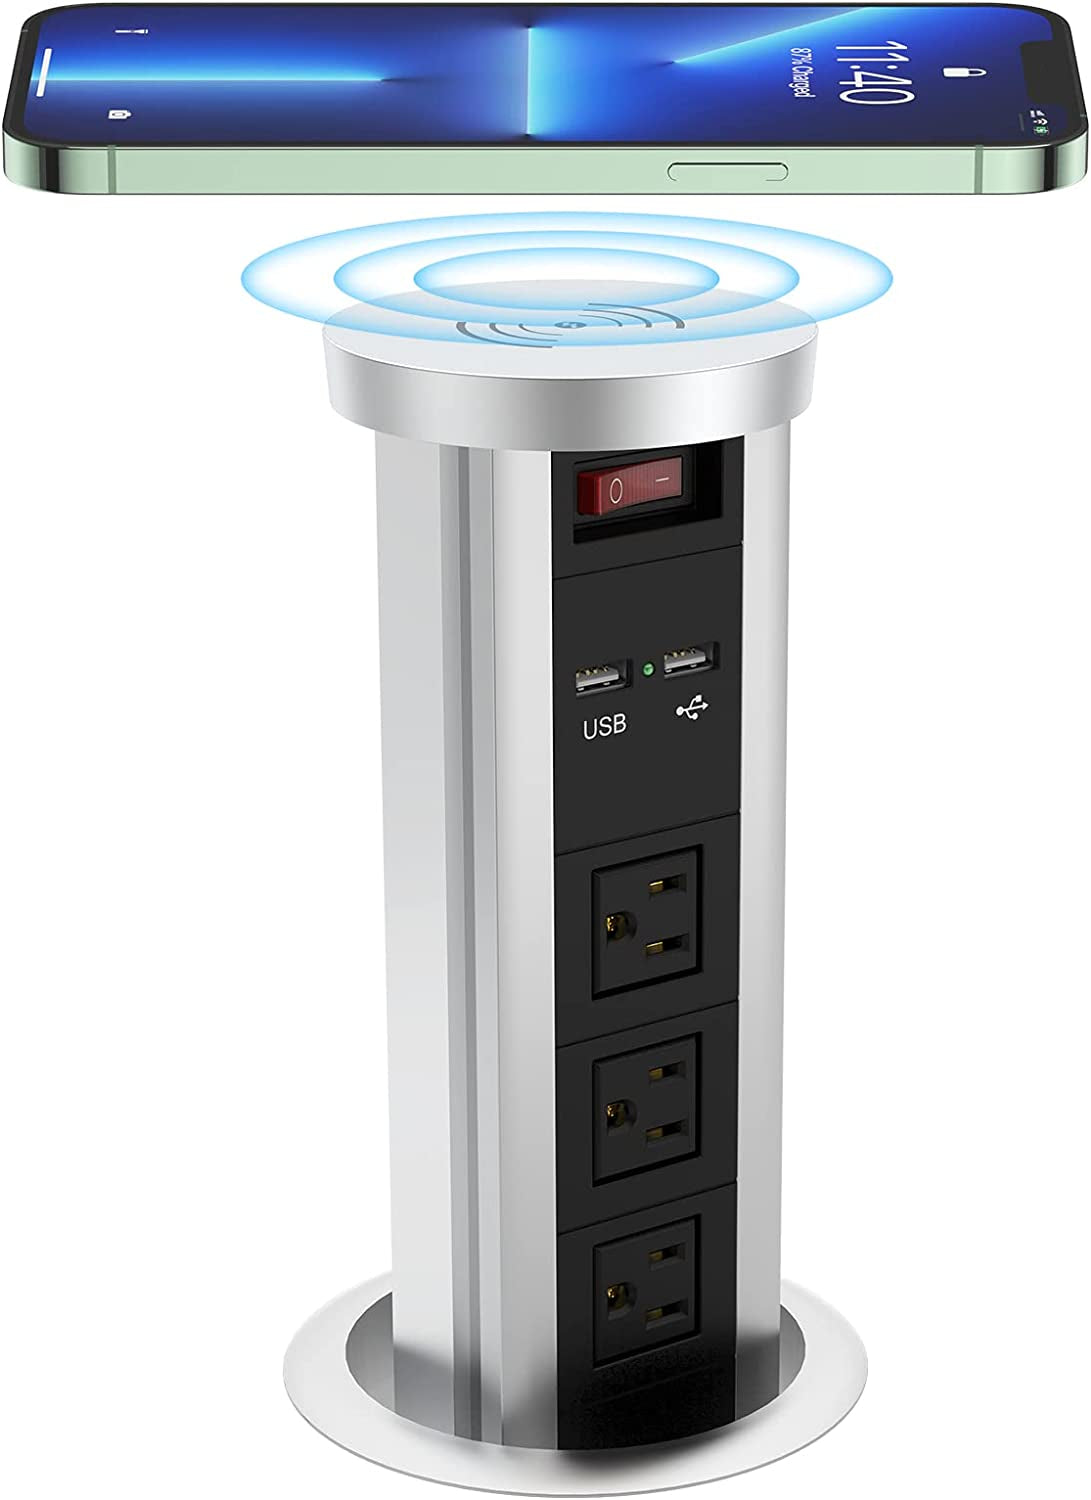 Automatic Pop up Power Outlet, Popup Wireless Charging Station with 3AC Plugs + 2 USB, Pop up Electrical Outlets for Countertops, Recessed Hidden Outlet for Kitchen Island Conference (Silver Black)